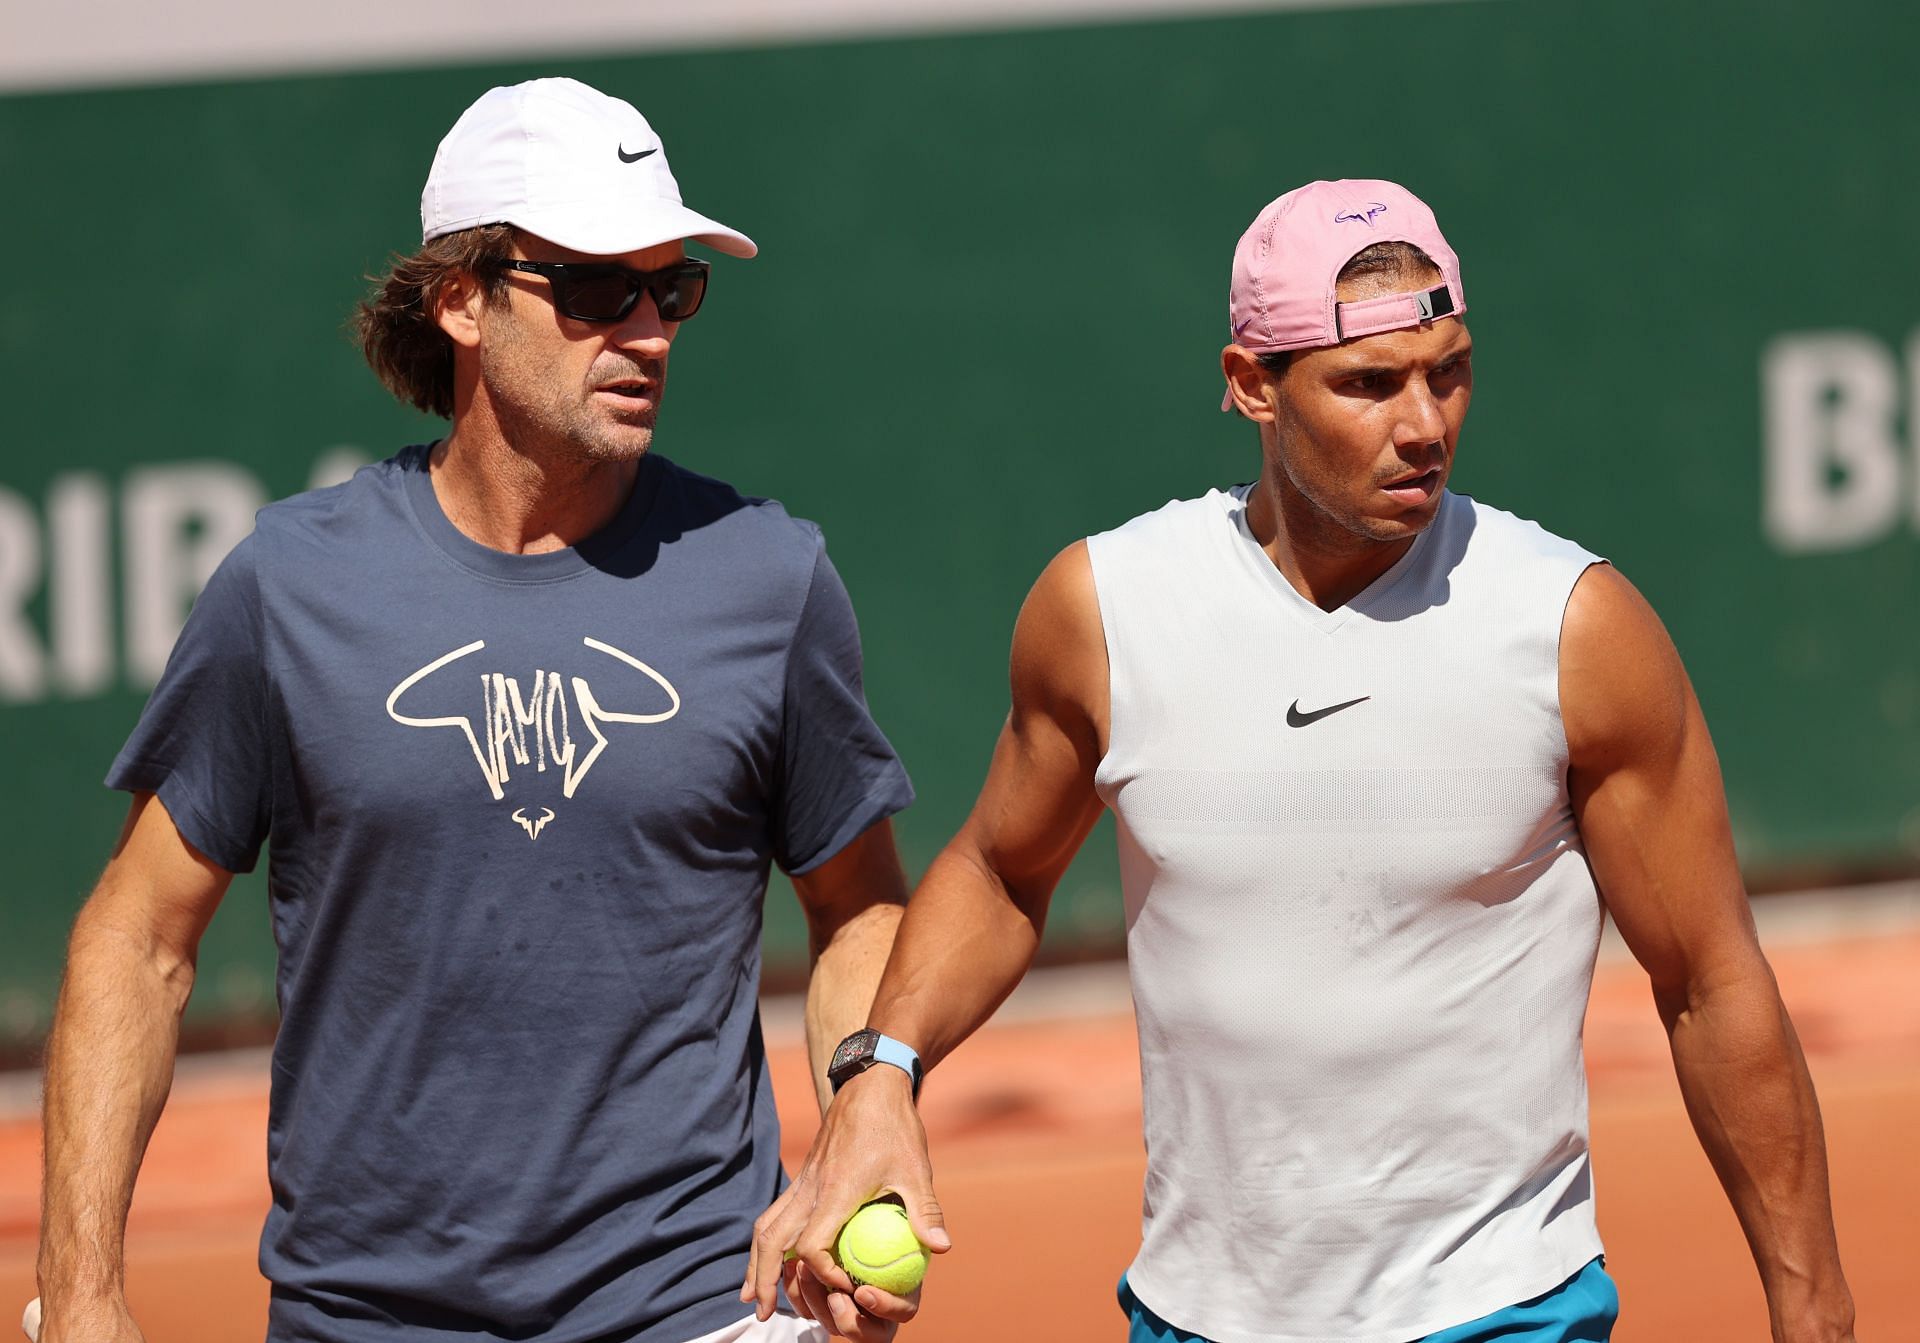 Rafael Nadal with his coach Carlos Moya as he trains in preparation for the 2021 French Open